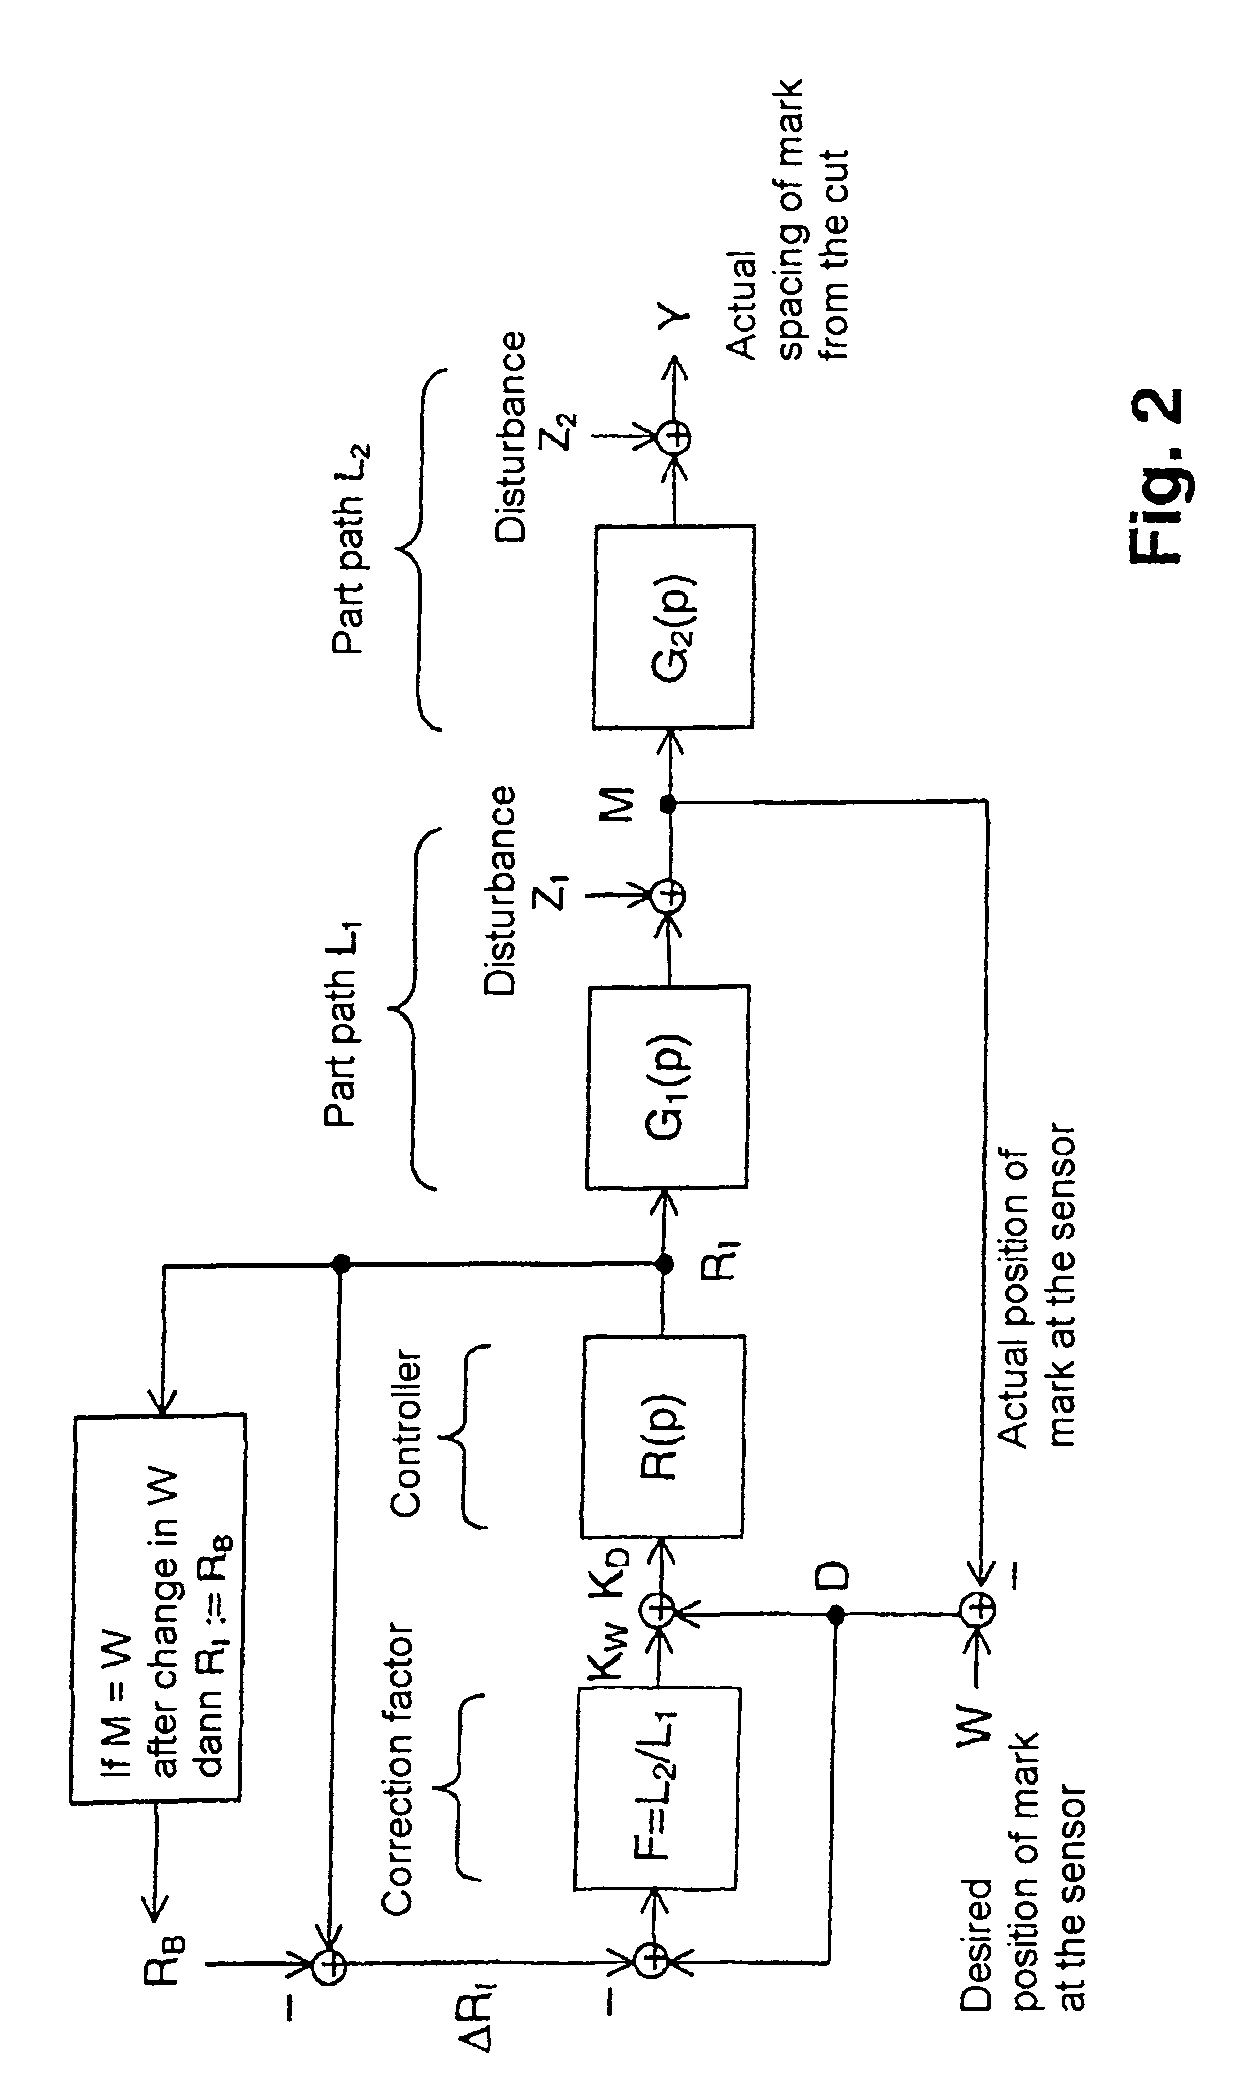 Method for controlling the cut register in a web-fed rotary press